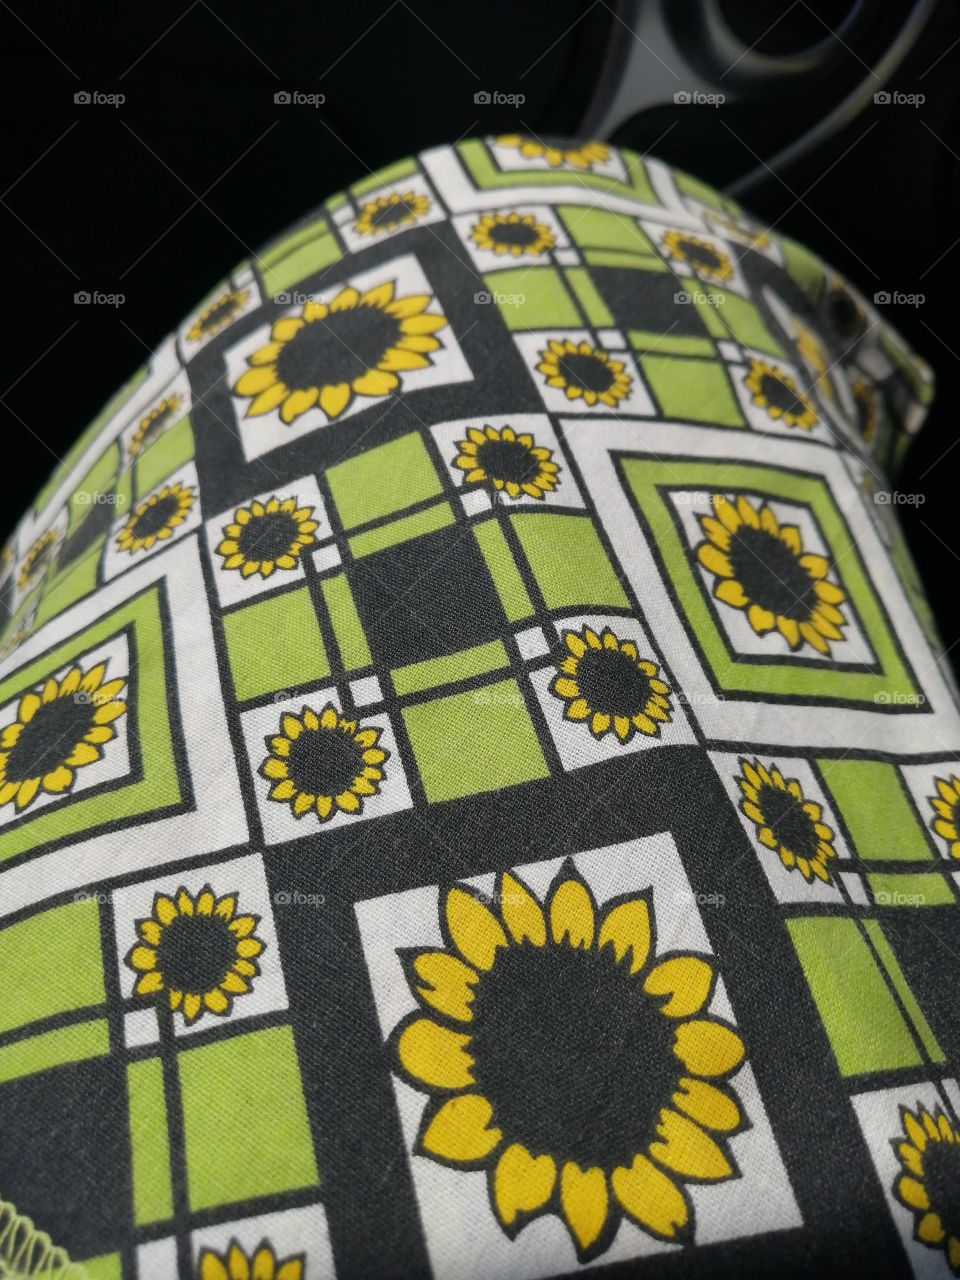 Bandana with sunflowers in support of Cancer research